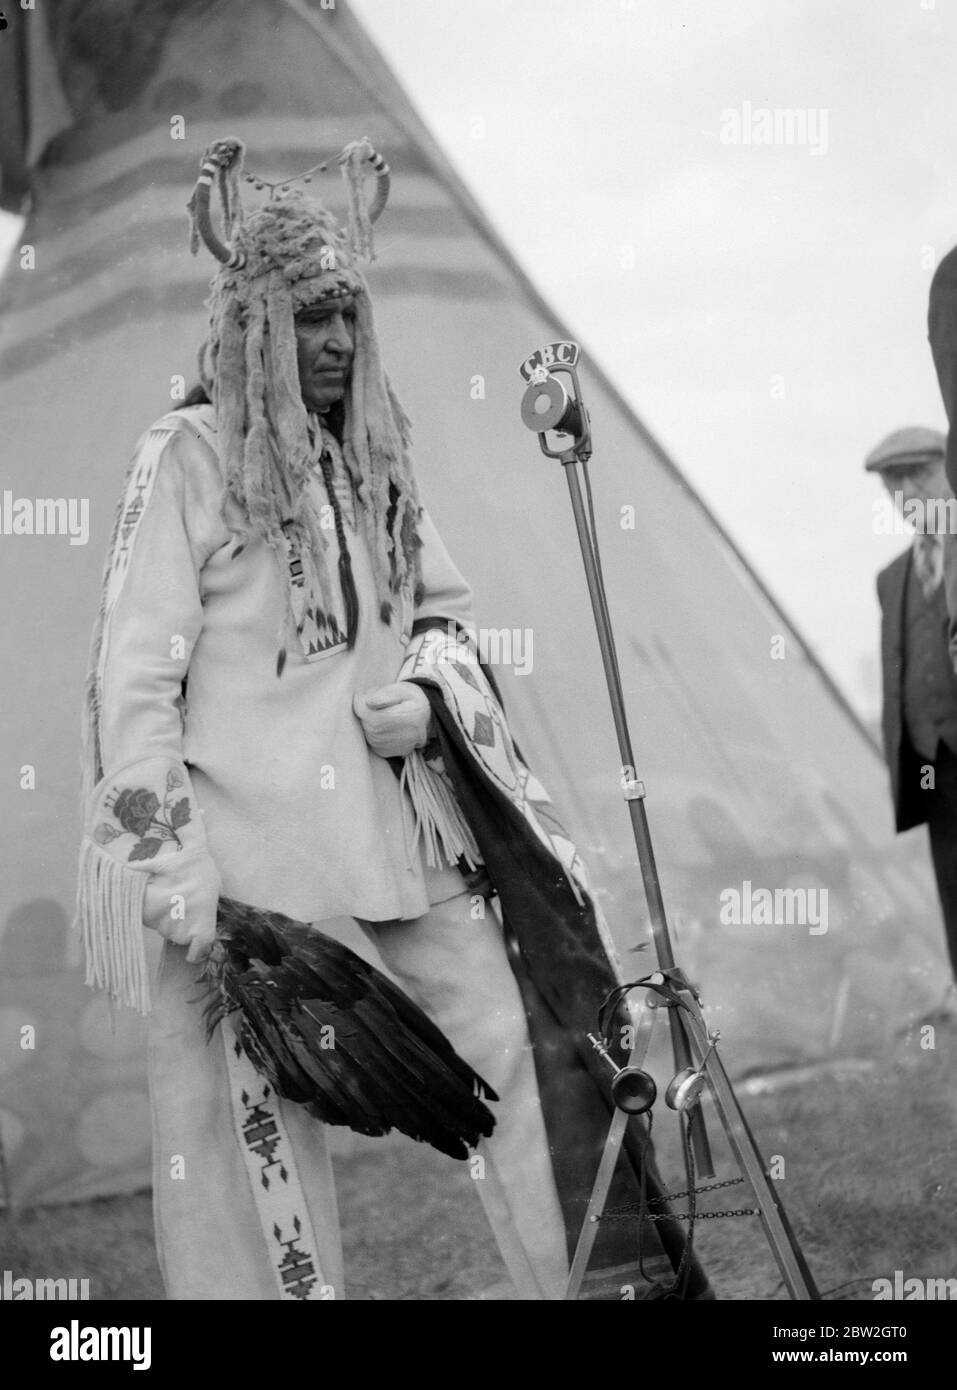 The Royal tour of Canada and the USA by King George VI and Queen Elizabeth , 1939 Indian Chief Percy Littledog at the microphone during the broadcast of the event when the King and Queen visited Calgary, Alberta , heart of the Canadian West. Stock Photo